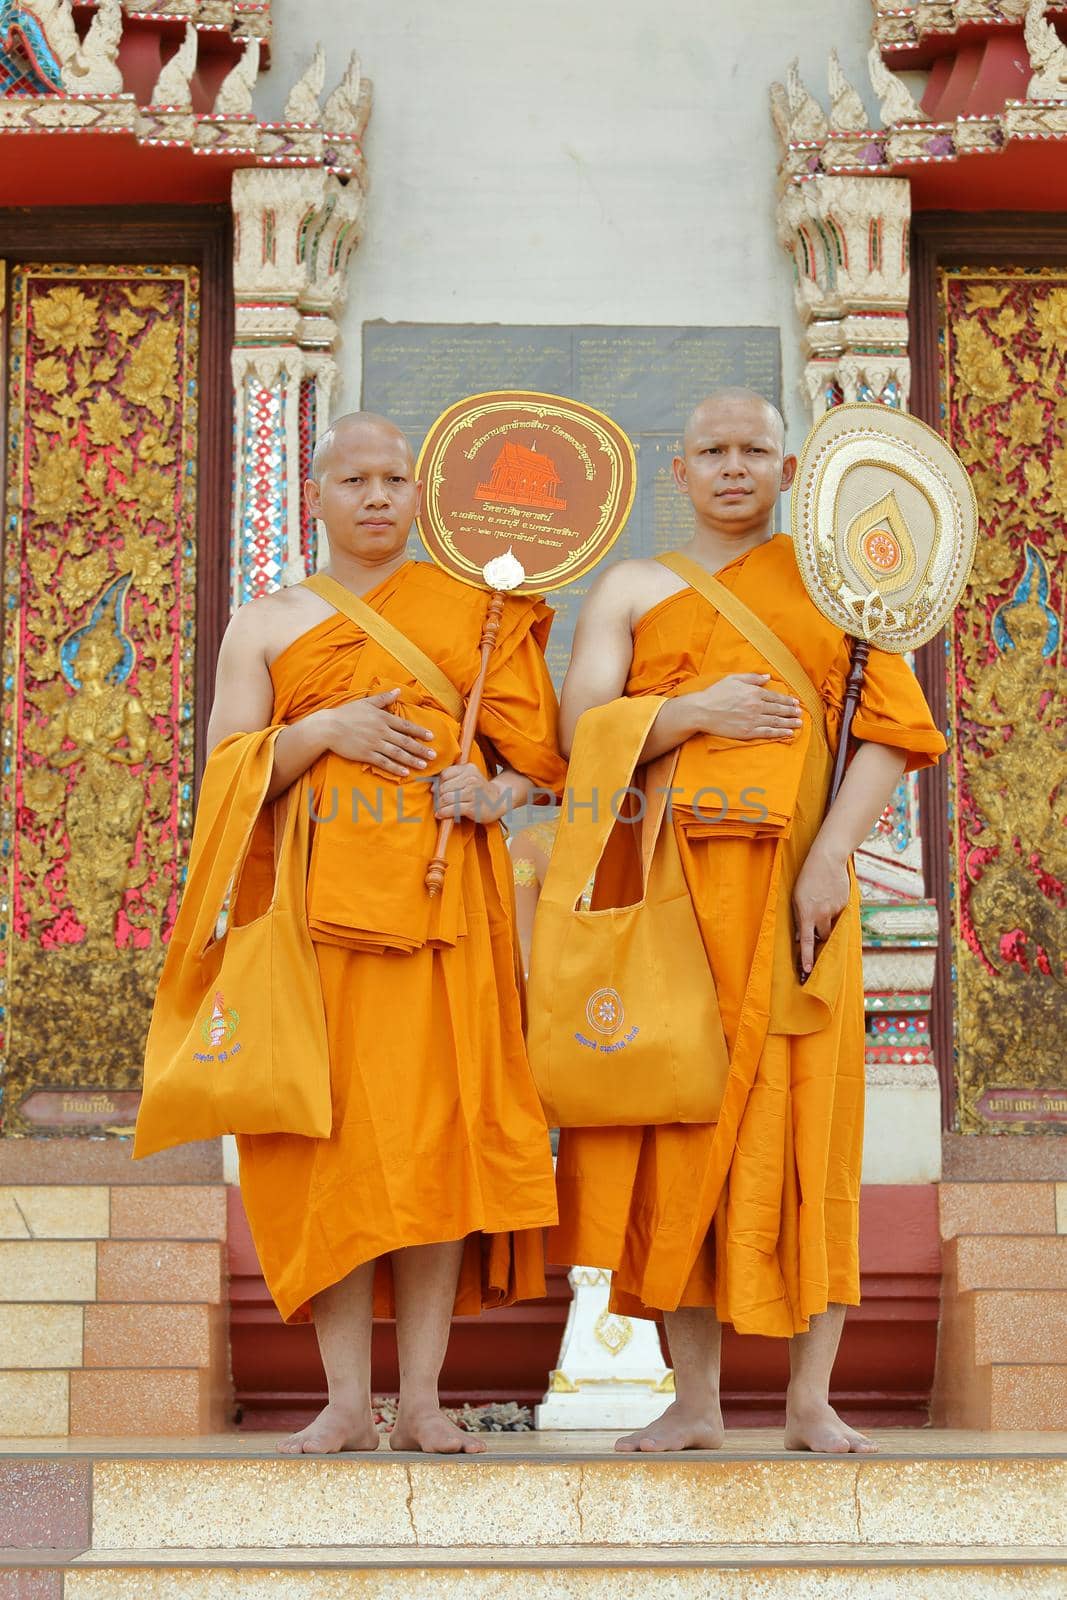 ordination ceremony that change the Thai young men to be the new monks by geargodz